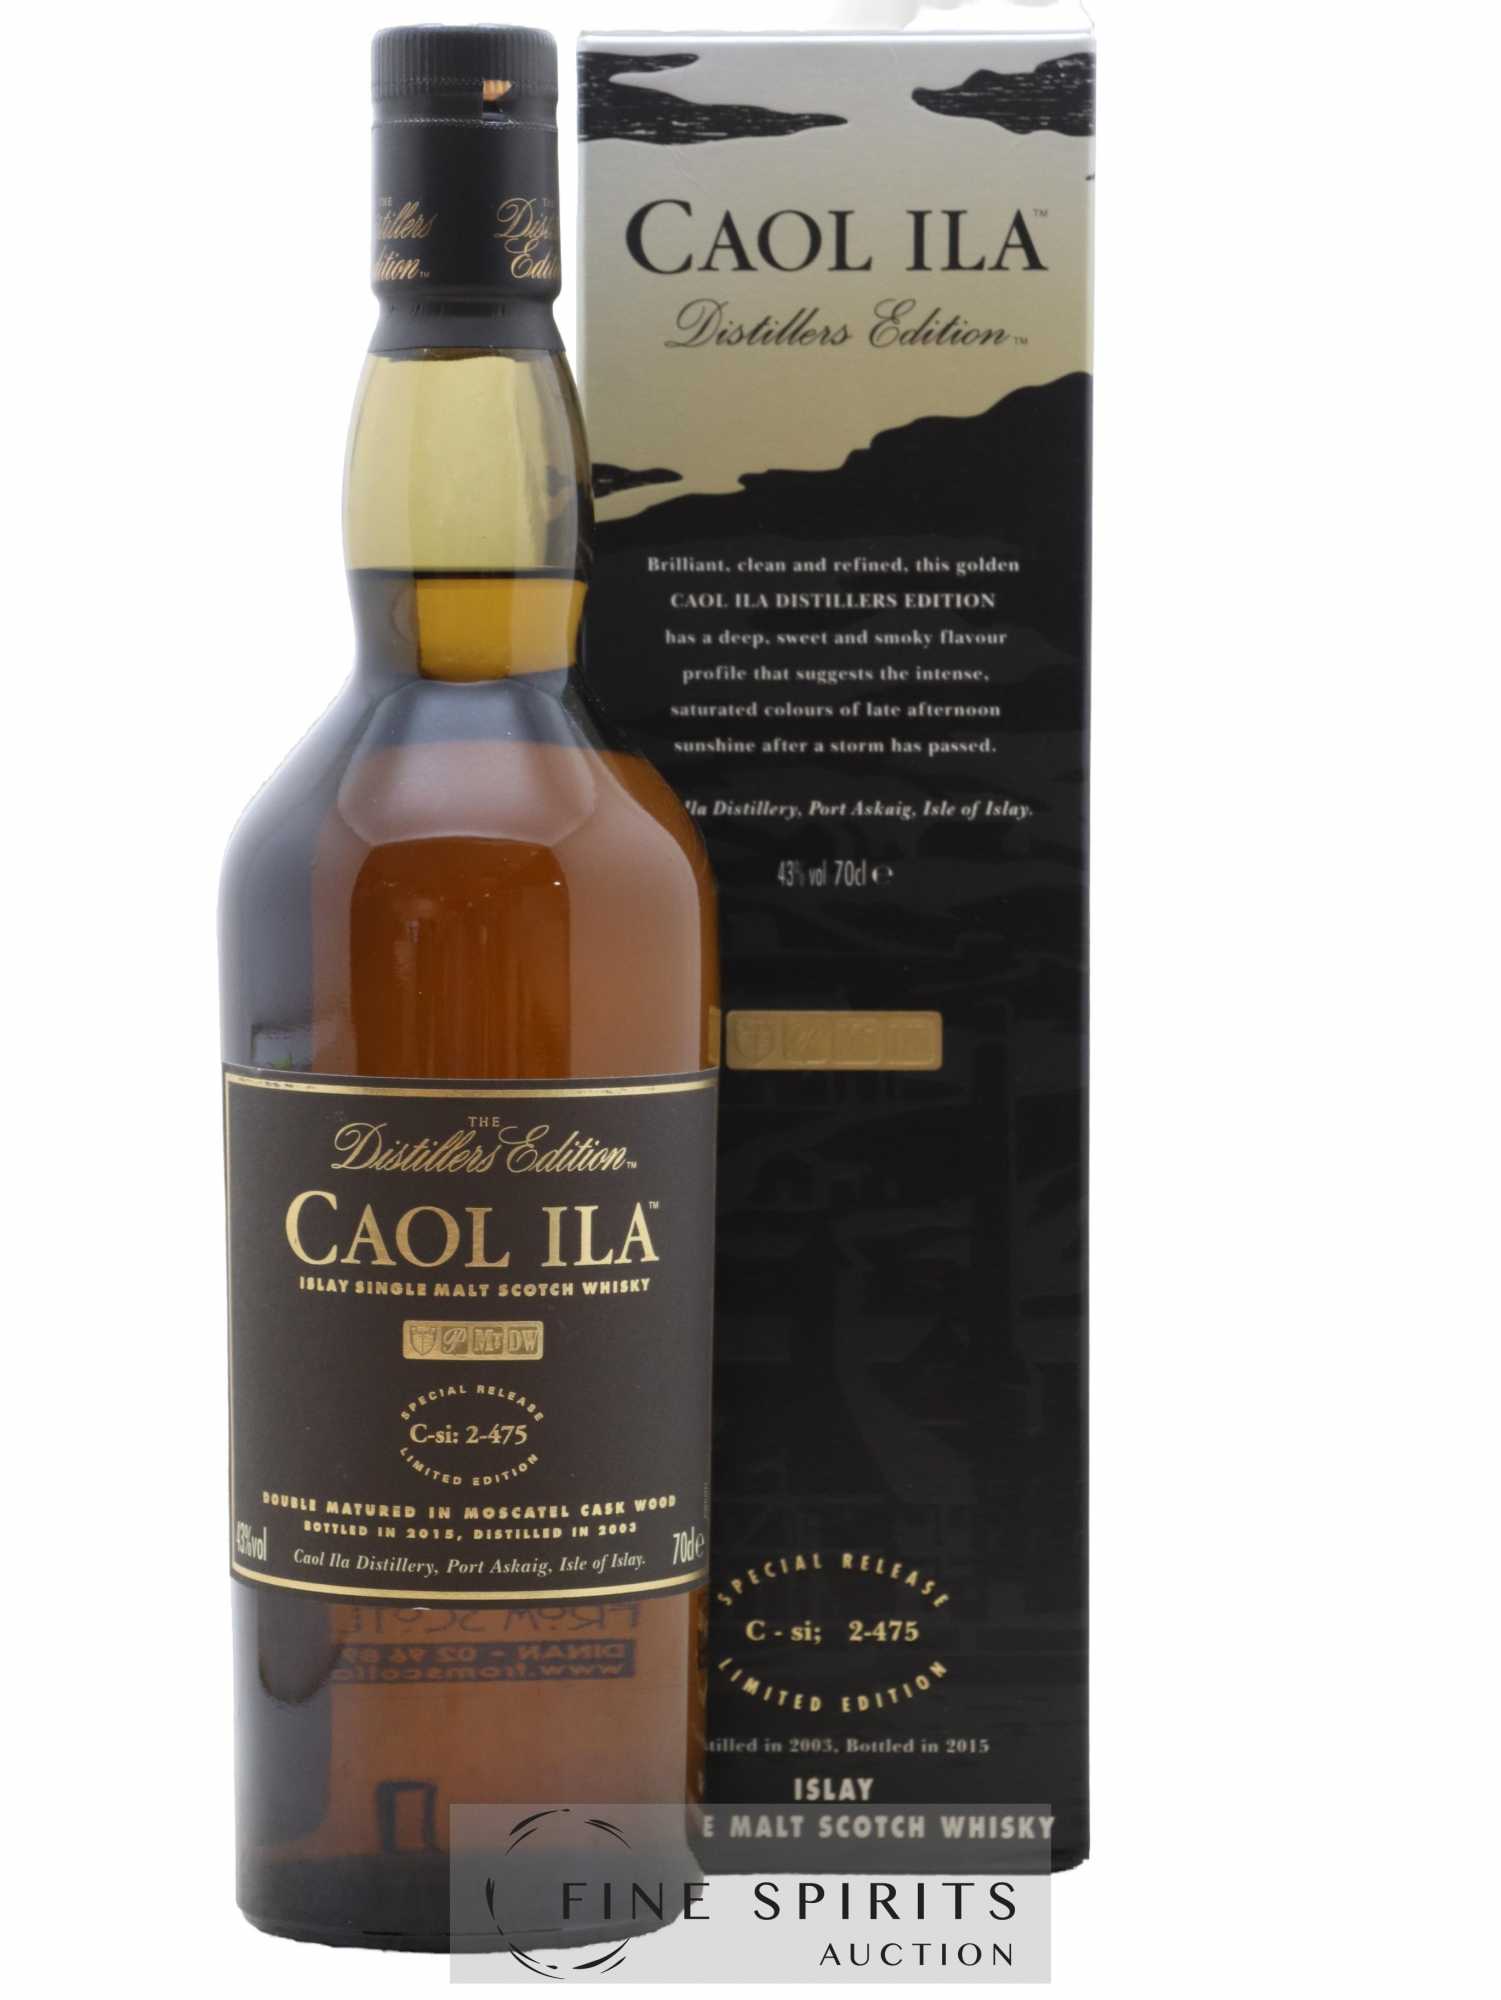 Caol Ila 2003 Of. Special Release C-si 2-475 - bottled 2015 The Distillers Edition 